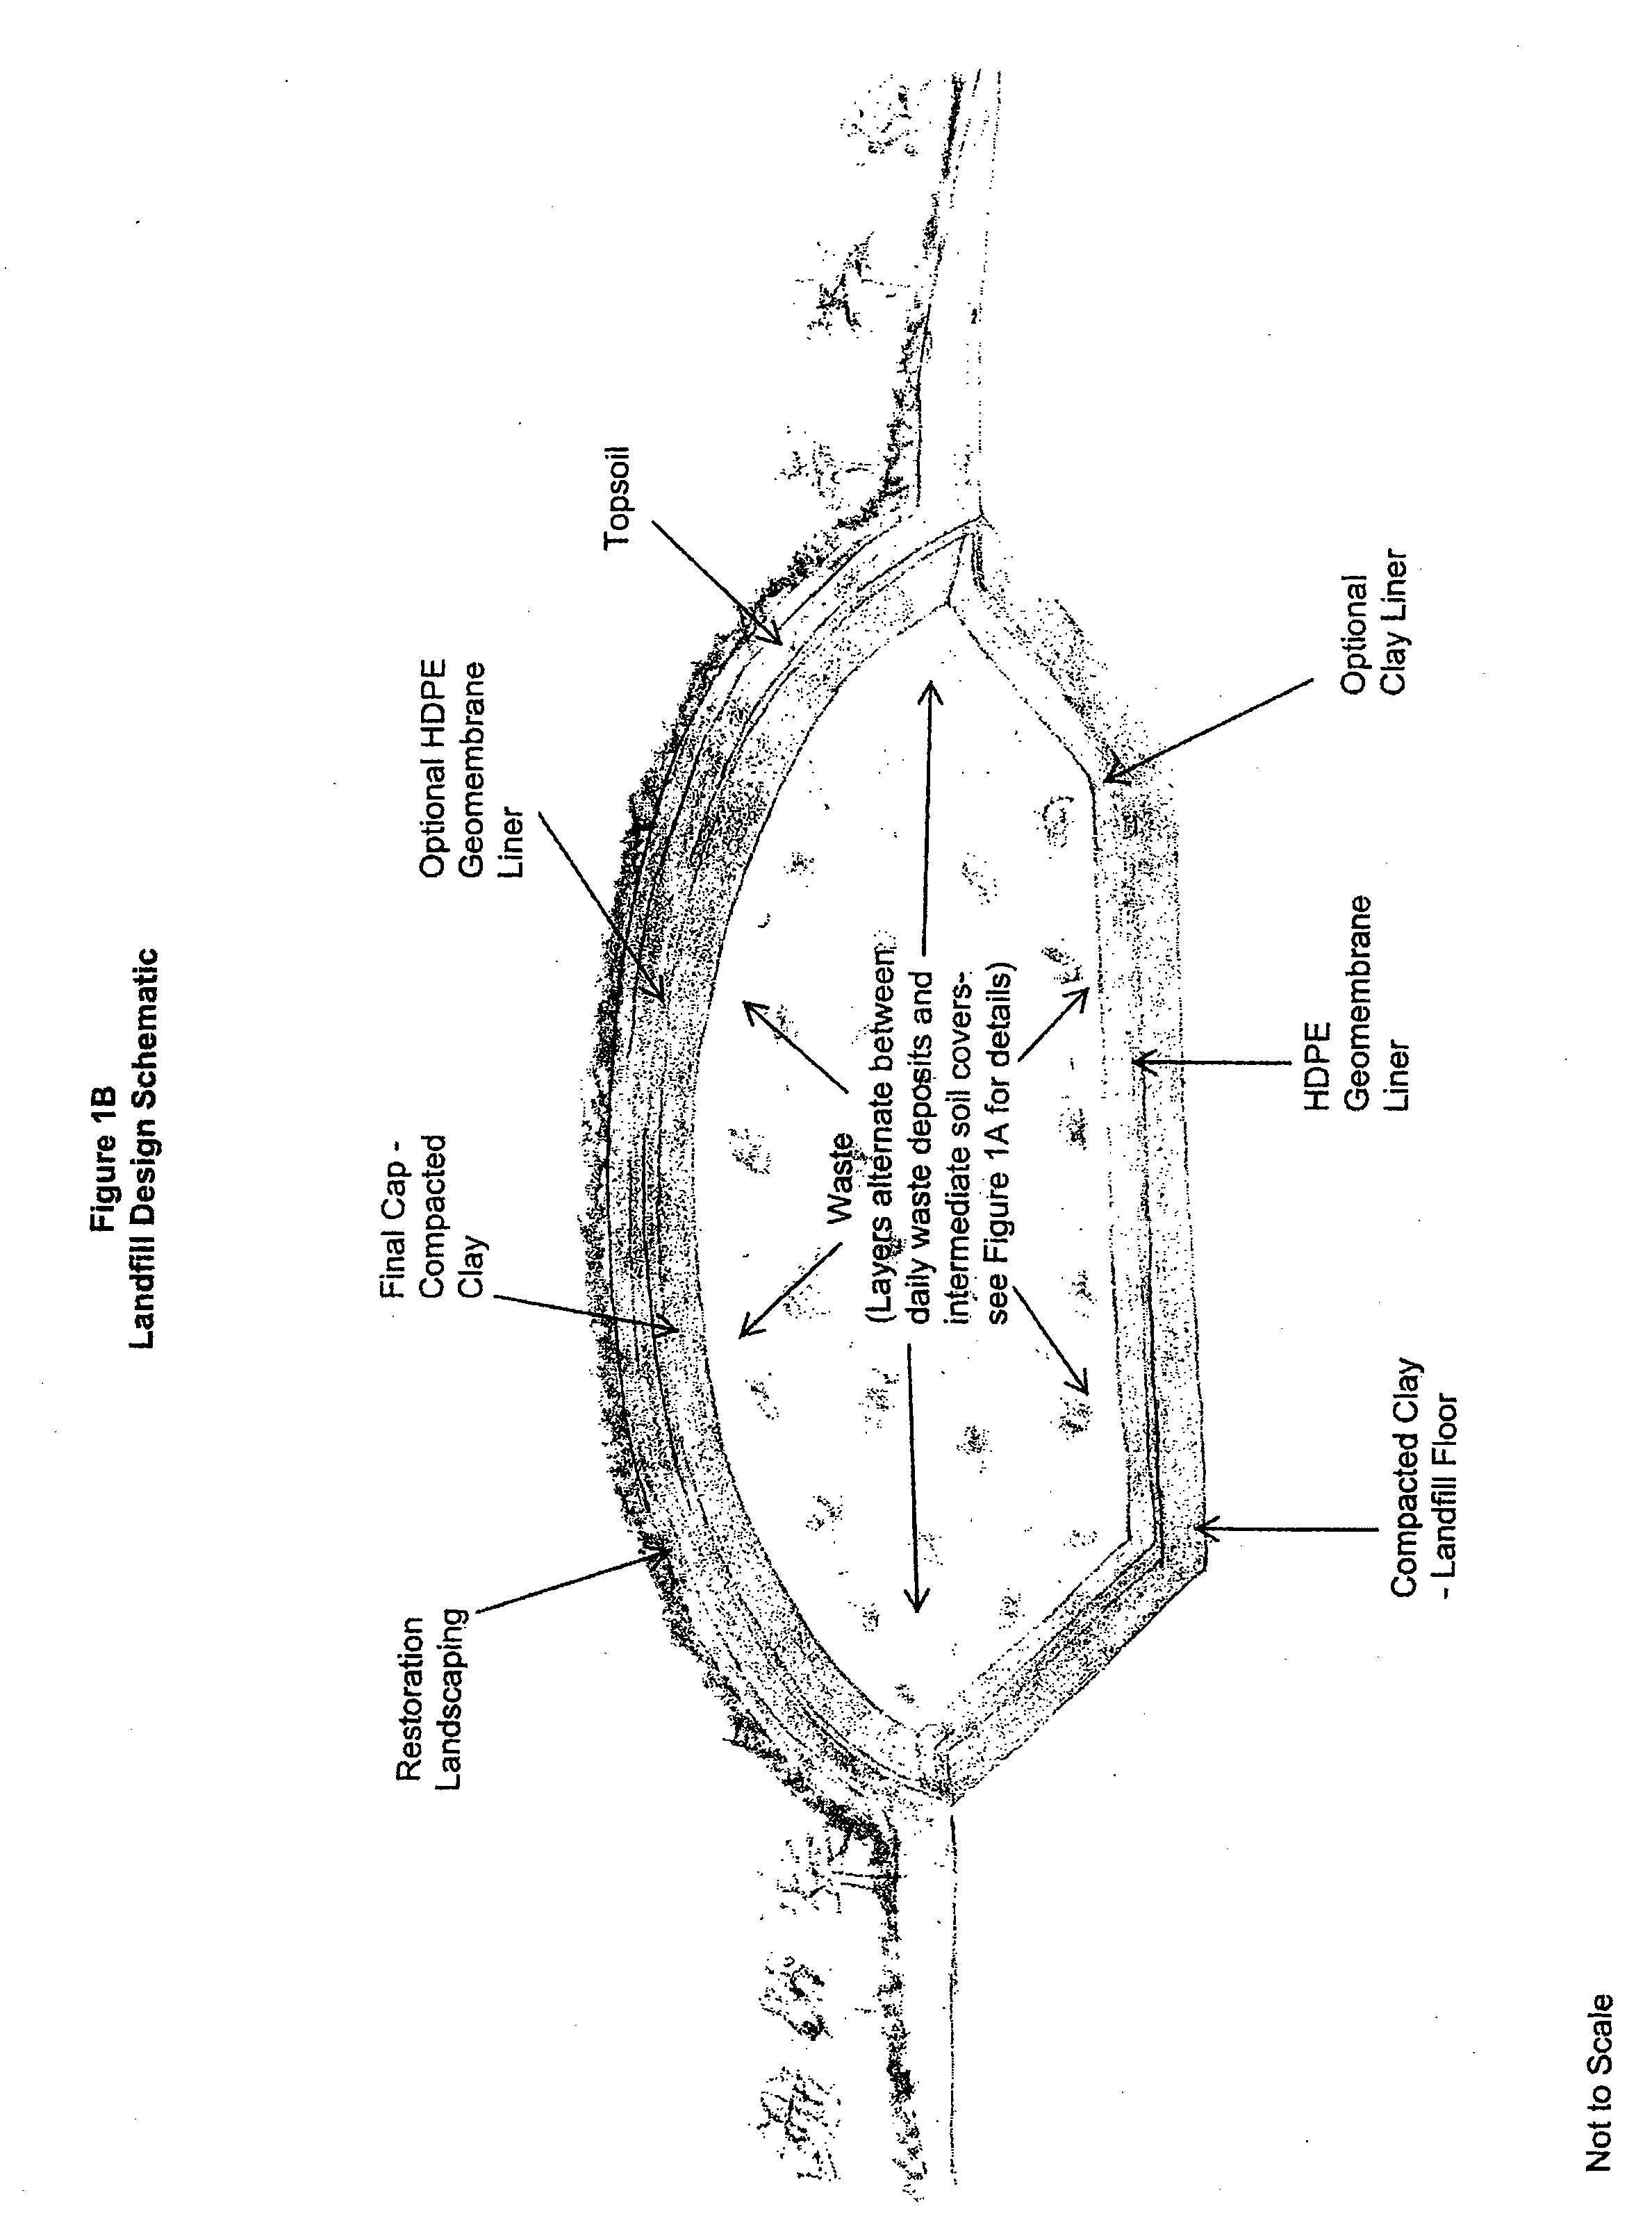 Tool and method for enhancing the extraction of landfill gas